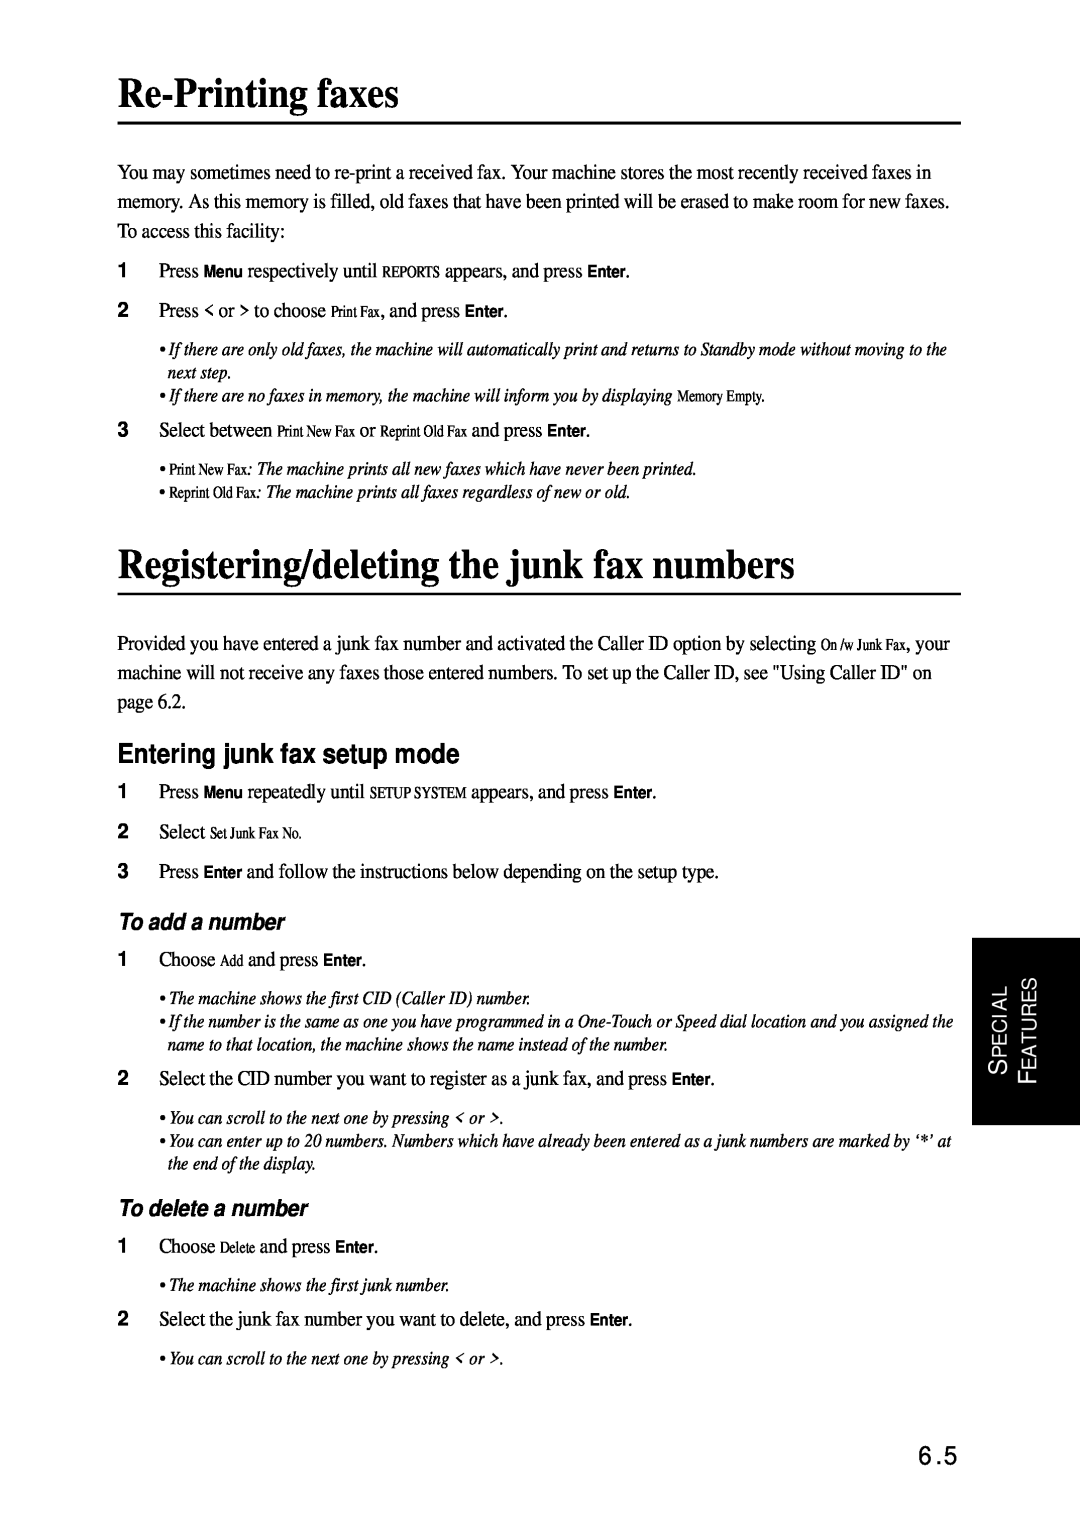 Samsung SF-340 Series manual Re-Printing faxes, Registering/deleting the junk fax numbers, Entering junk fax setup mode 